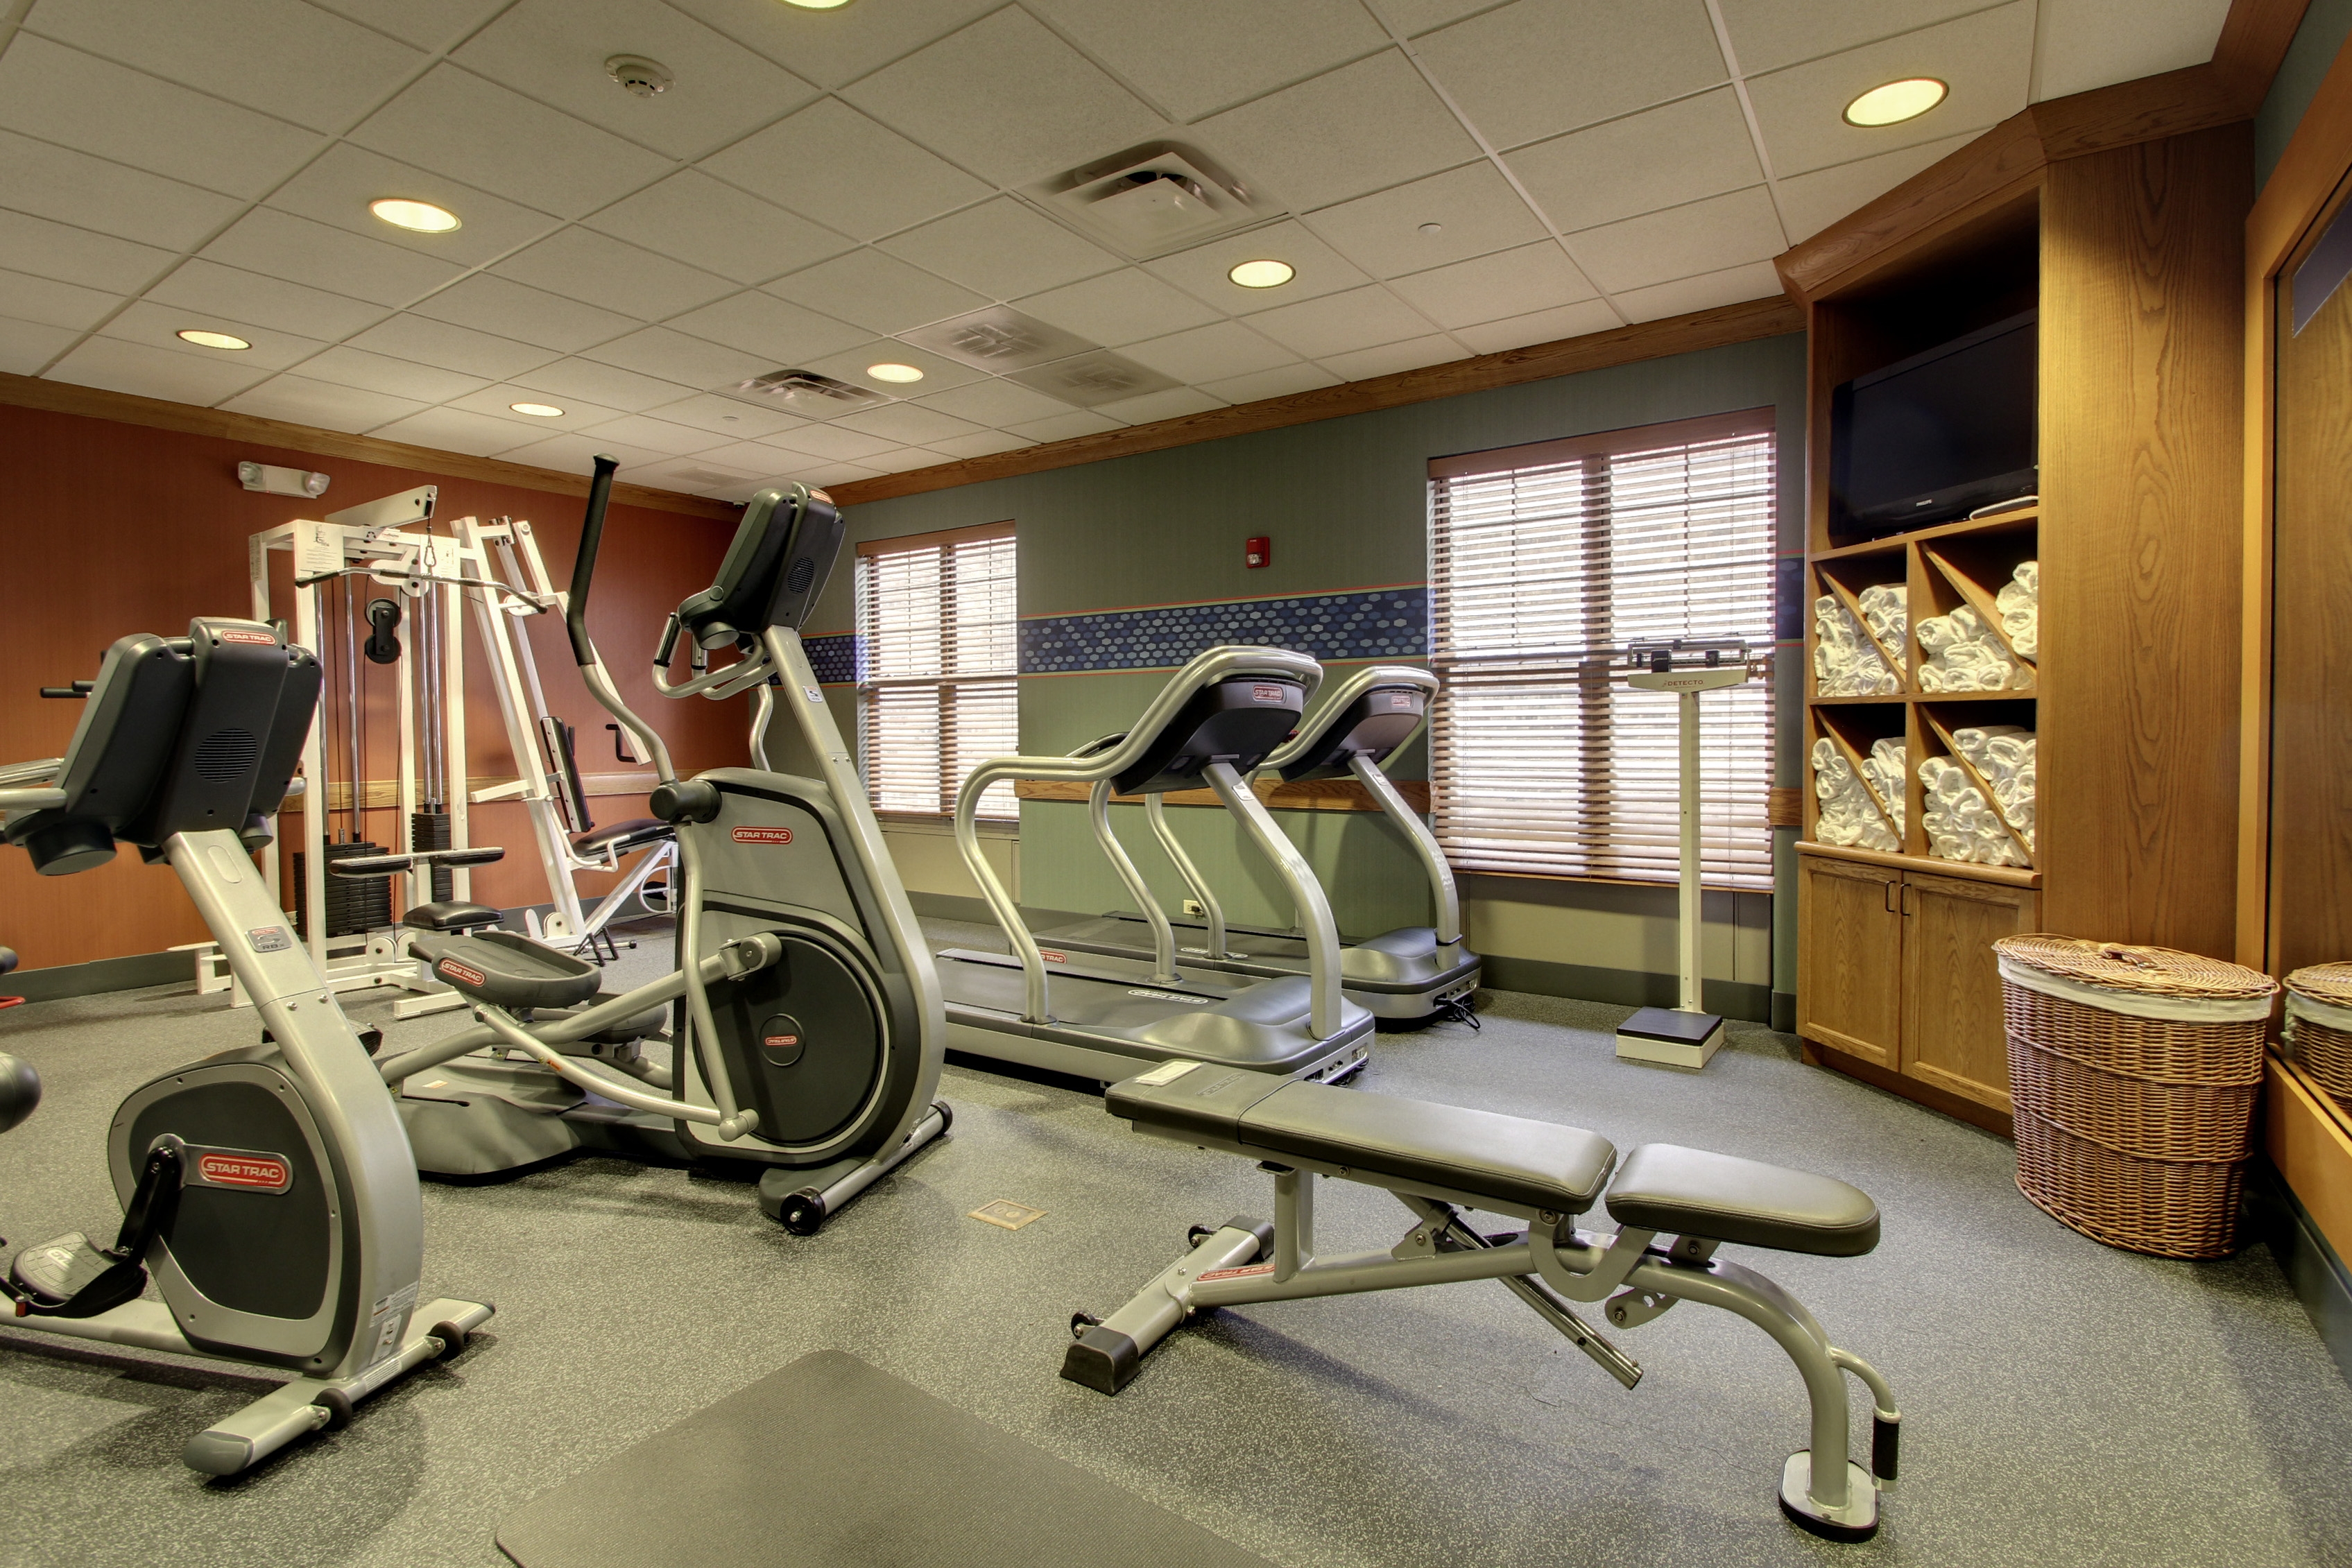 Fitness Center With Weight Bench, Cardio Equipment, Towel Station, and Wight Bench